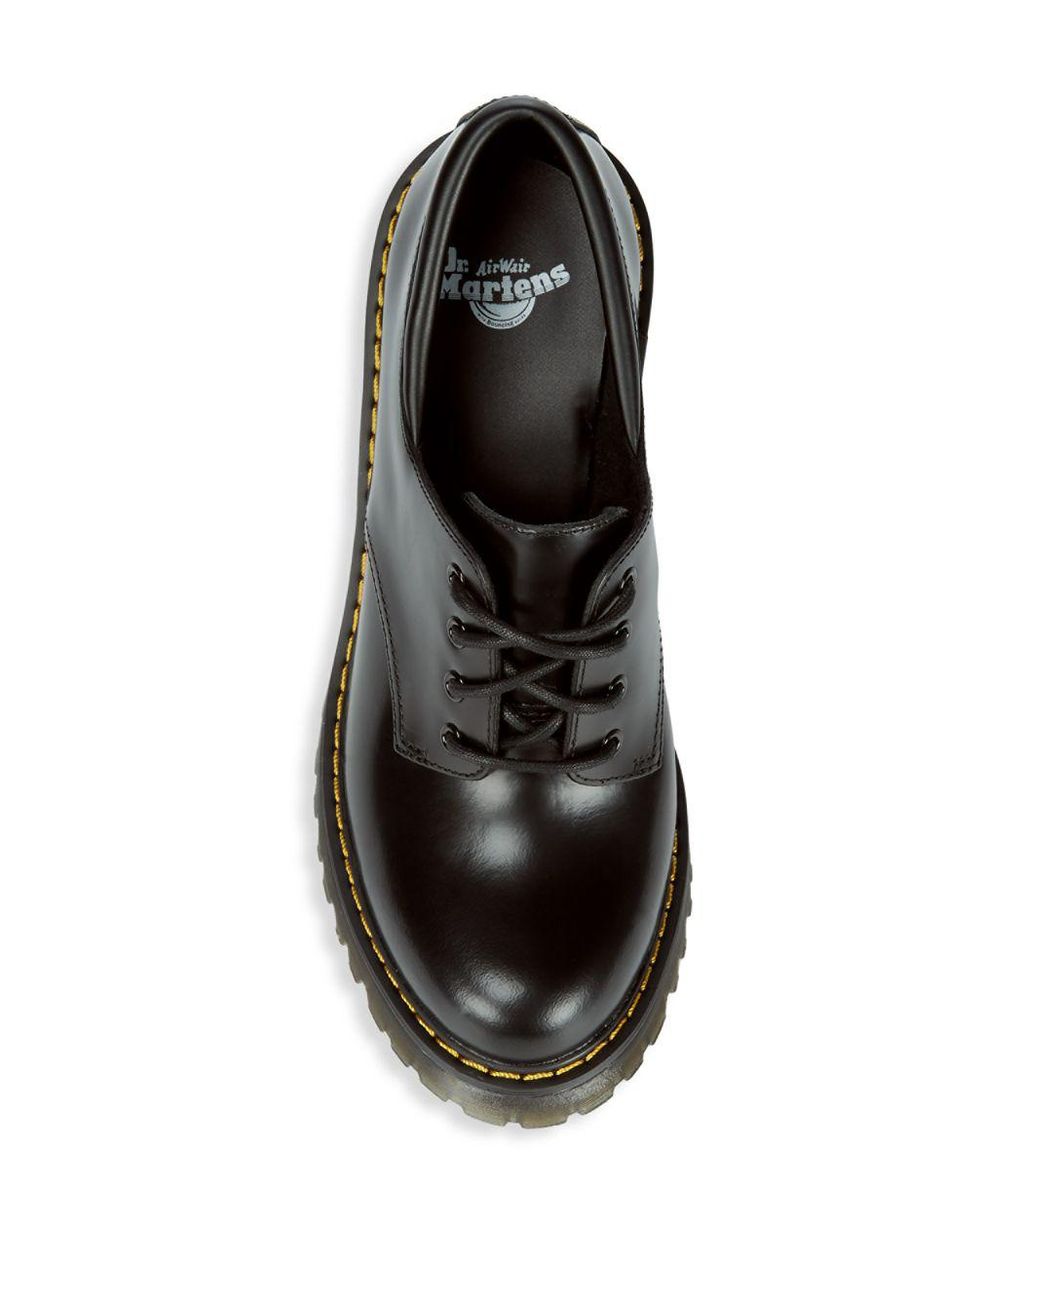 Dr. Martens Salome Lace-up Heels in Black | Lyst